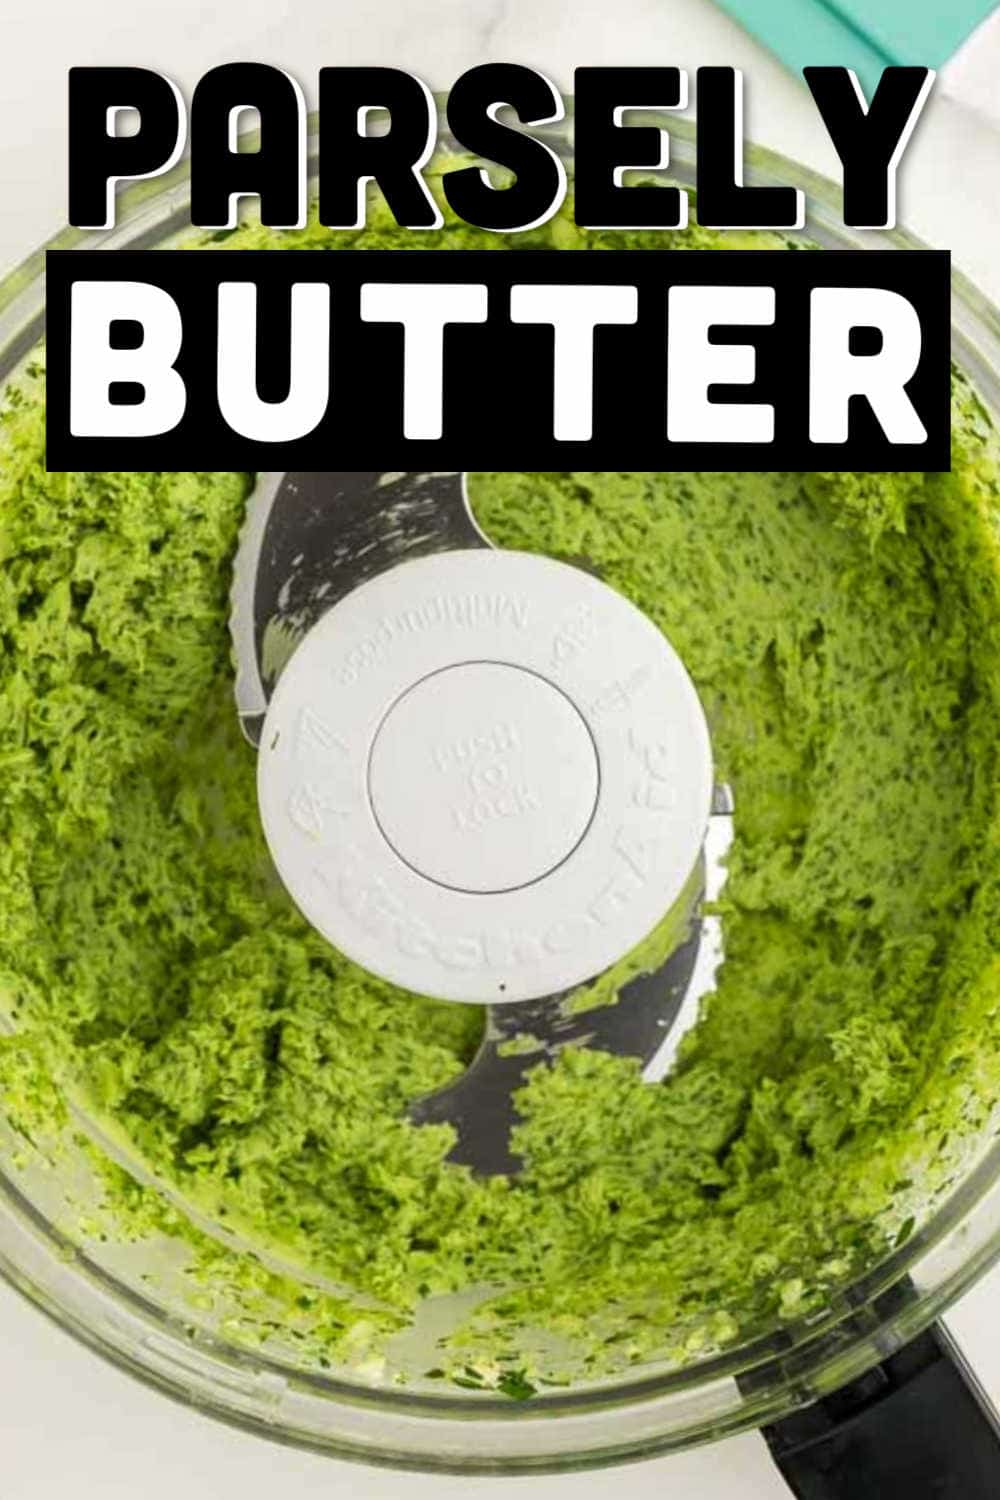 Parsley Butter is a simple compound butter recipe made with creamy unsalted butter, onions, garlic, and of course parsley. Perfect for steaks, corn-on-the-cob, or to thicken and flavor a great sauce, this easy compound butter recipe can be used in lots of recipes #cheerfulcook #parsleybutter #compoundbiyyrt via @cheerfulcook